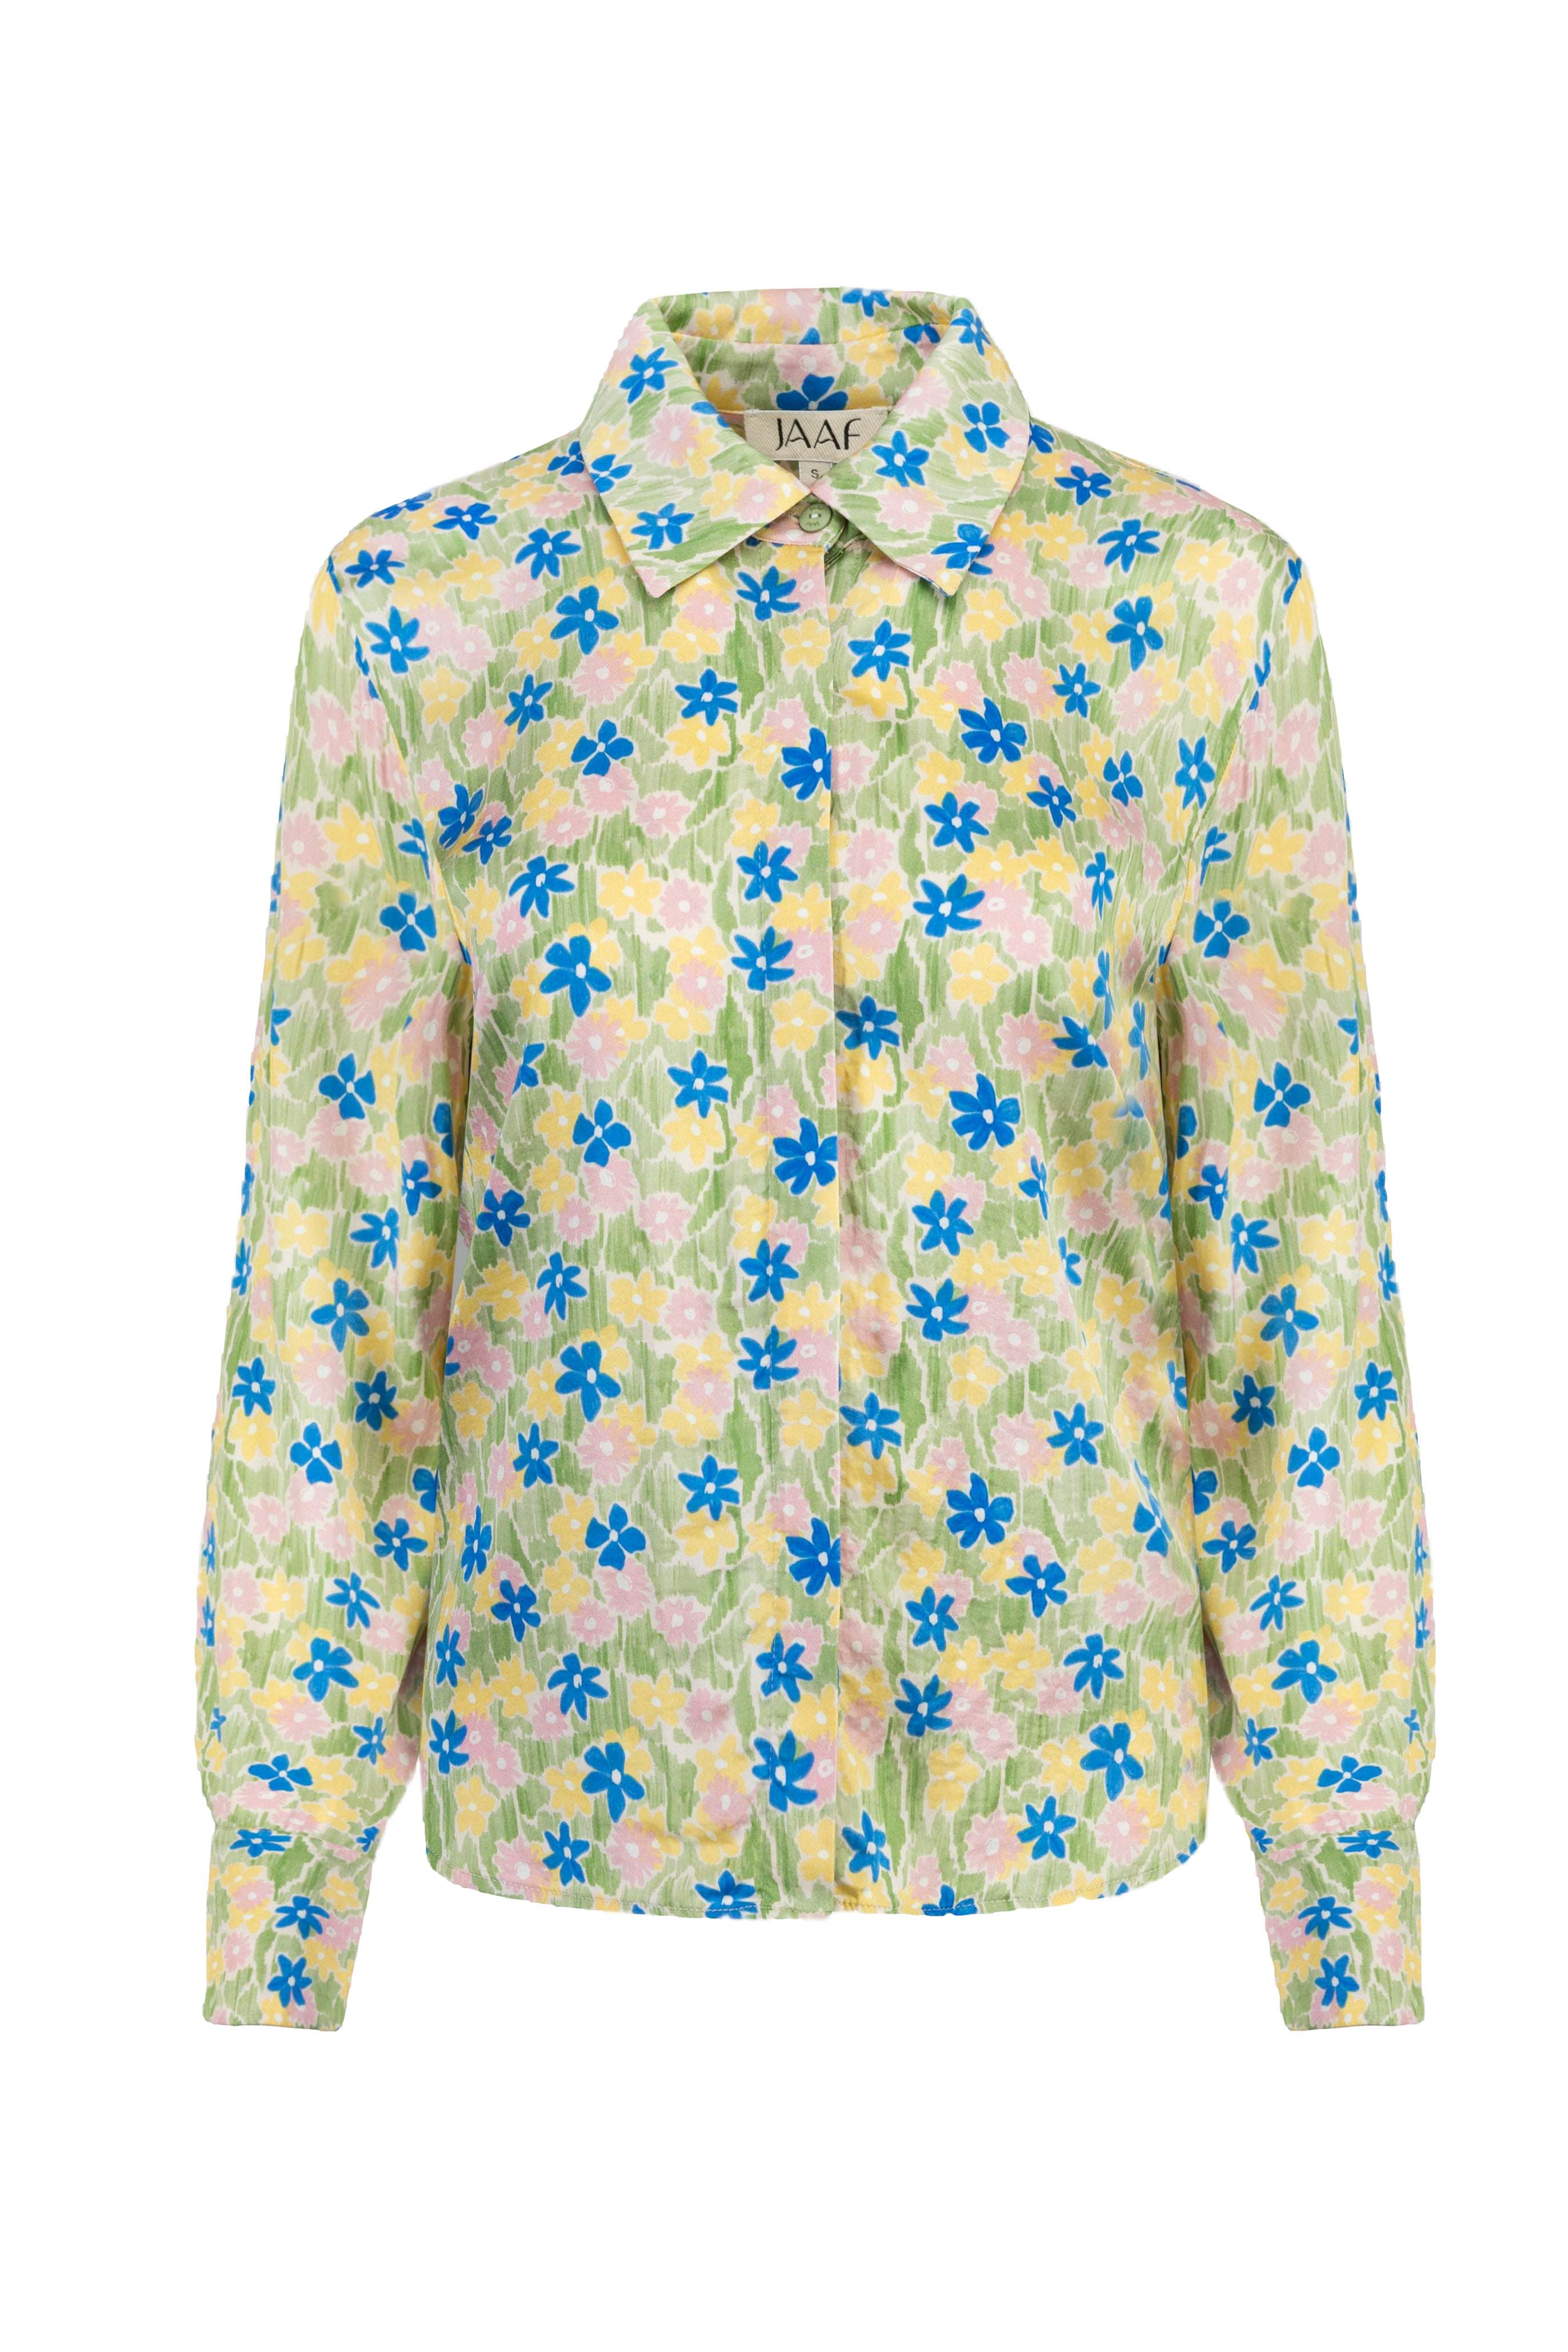 Jaaf Relaxed Shirt In Meadow Print In Multi Color